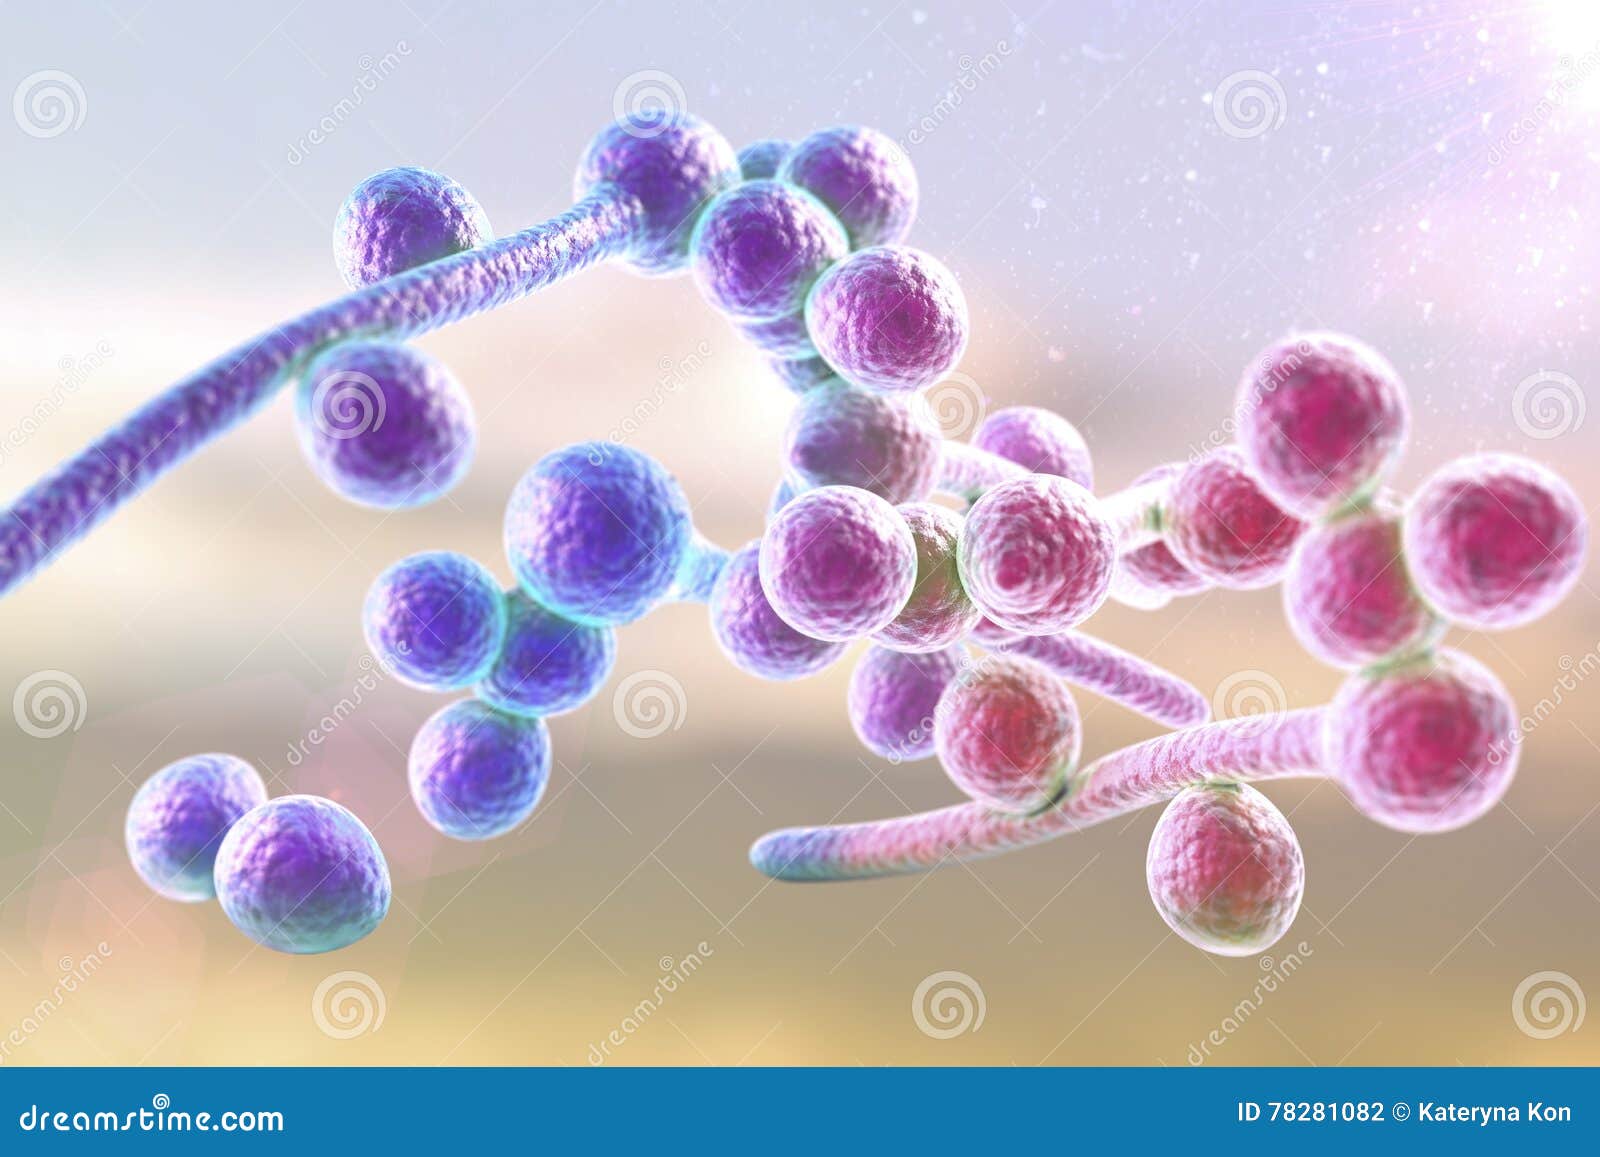 Fungi Candida Albicans Which Cause Thrush Stock Illustration ...